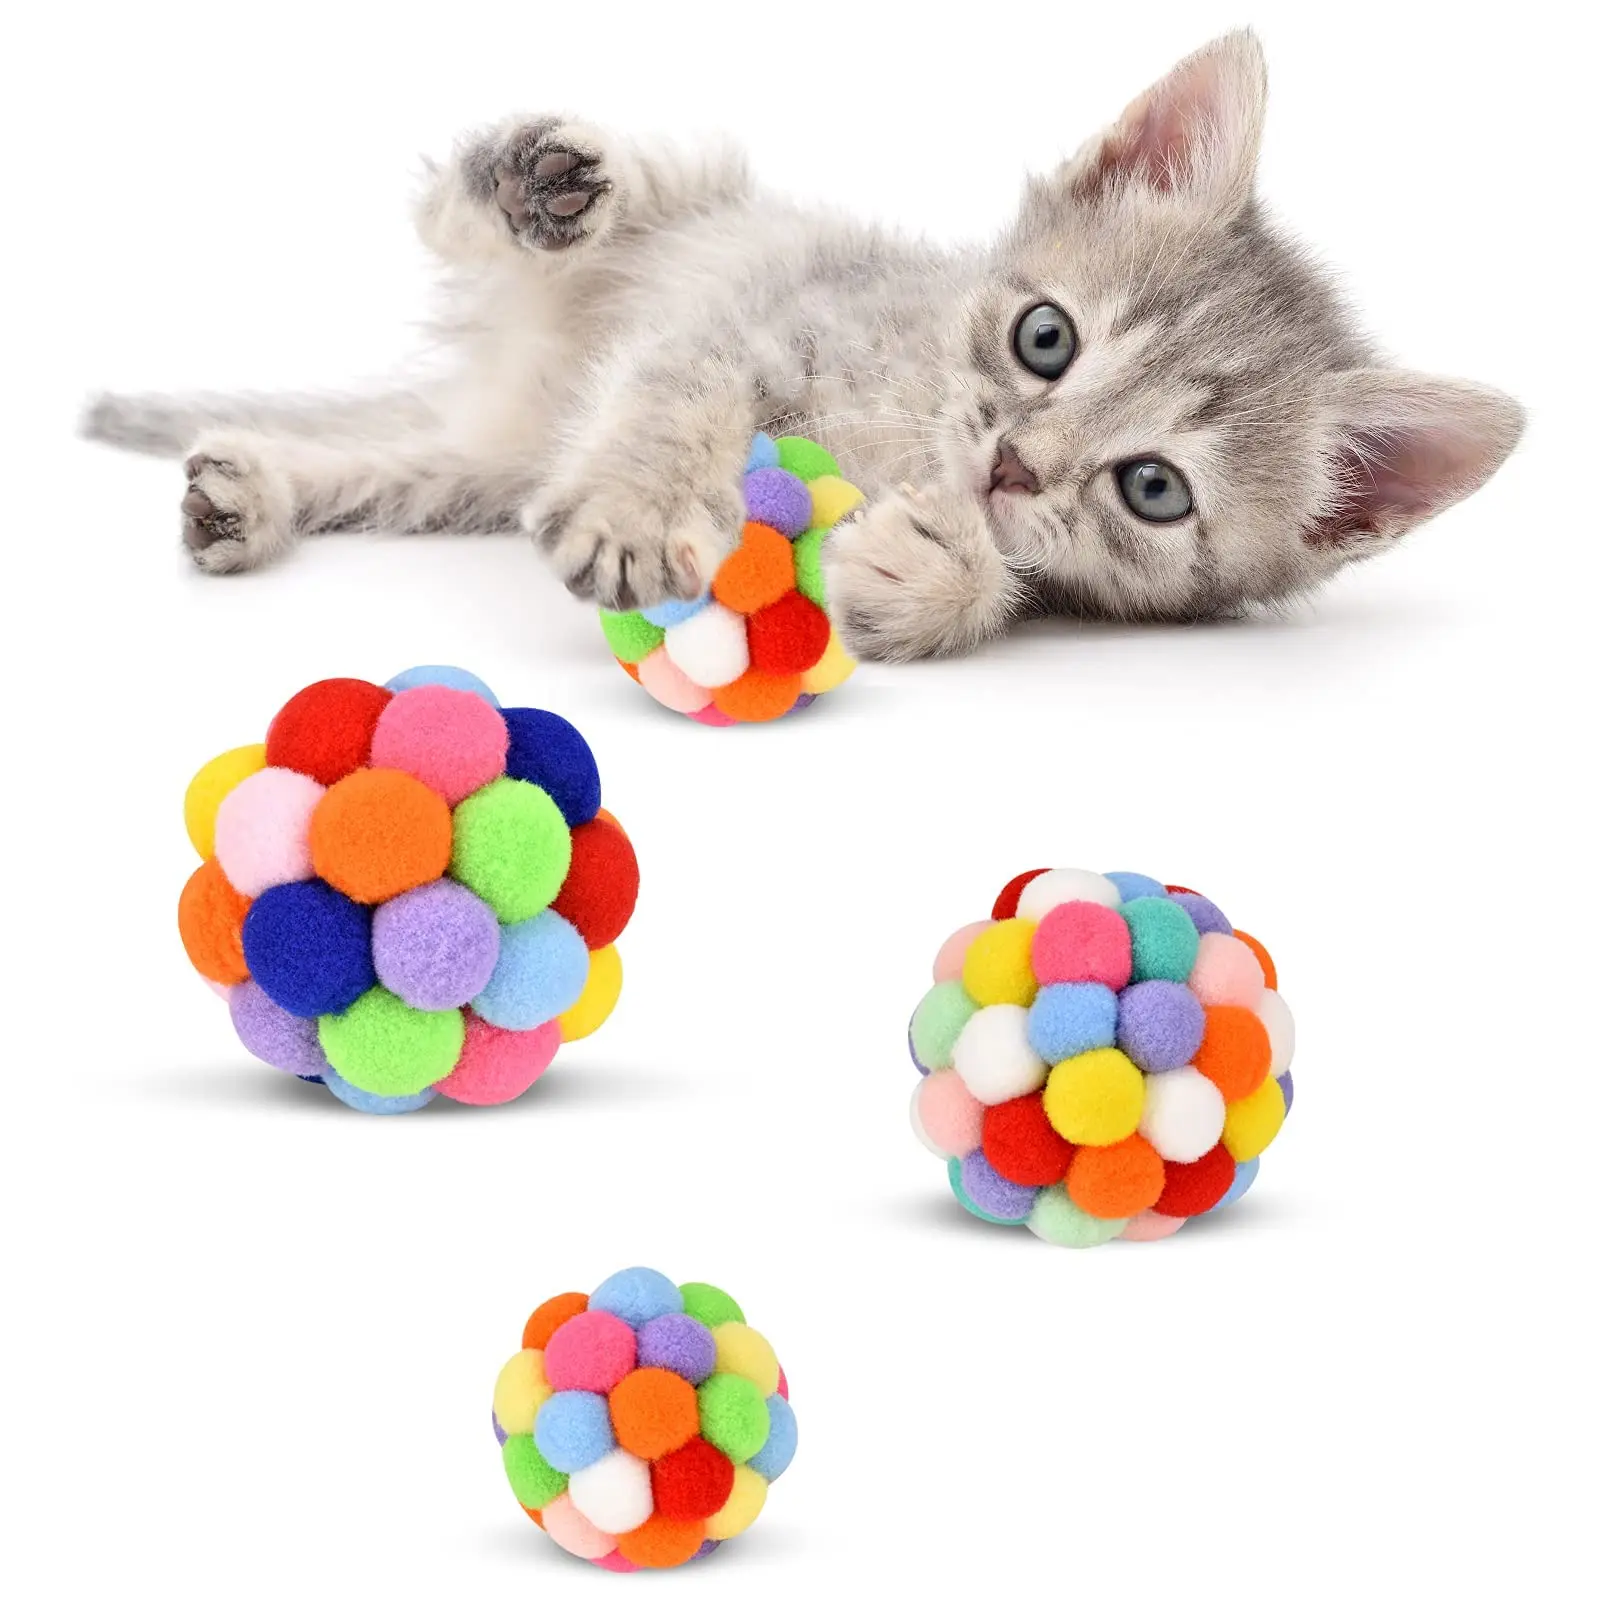 

Cat Toy Balls with Bell Colorful Soft Fuzzy Balls Built-in Bell for Cats, Chewing Toys Interactive Cat Toys for Kittens